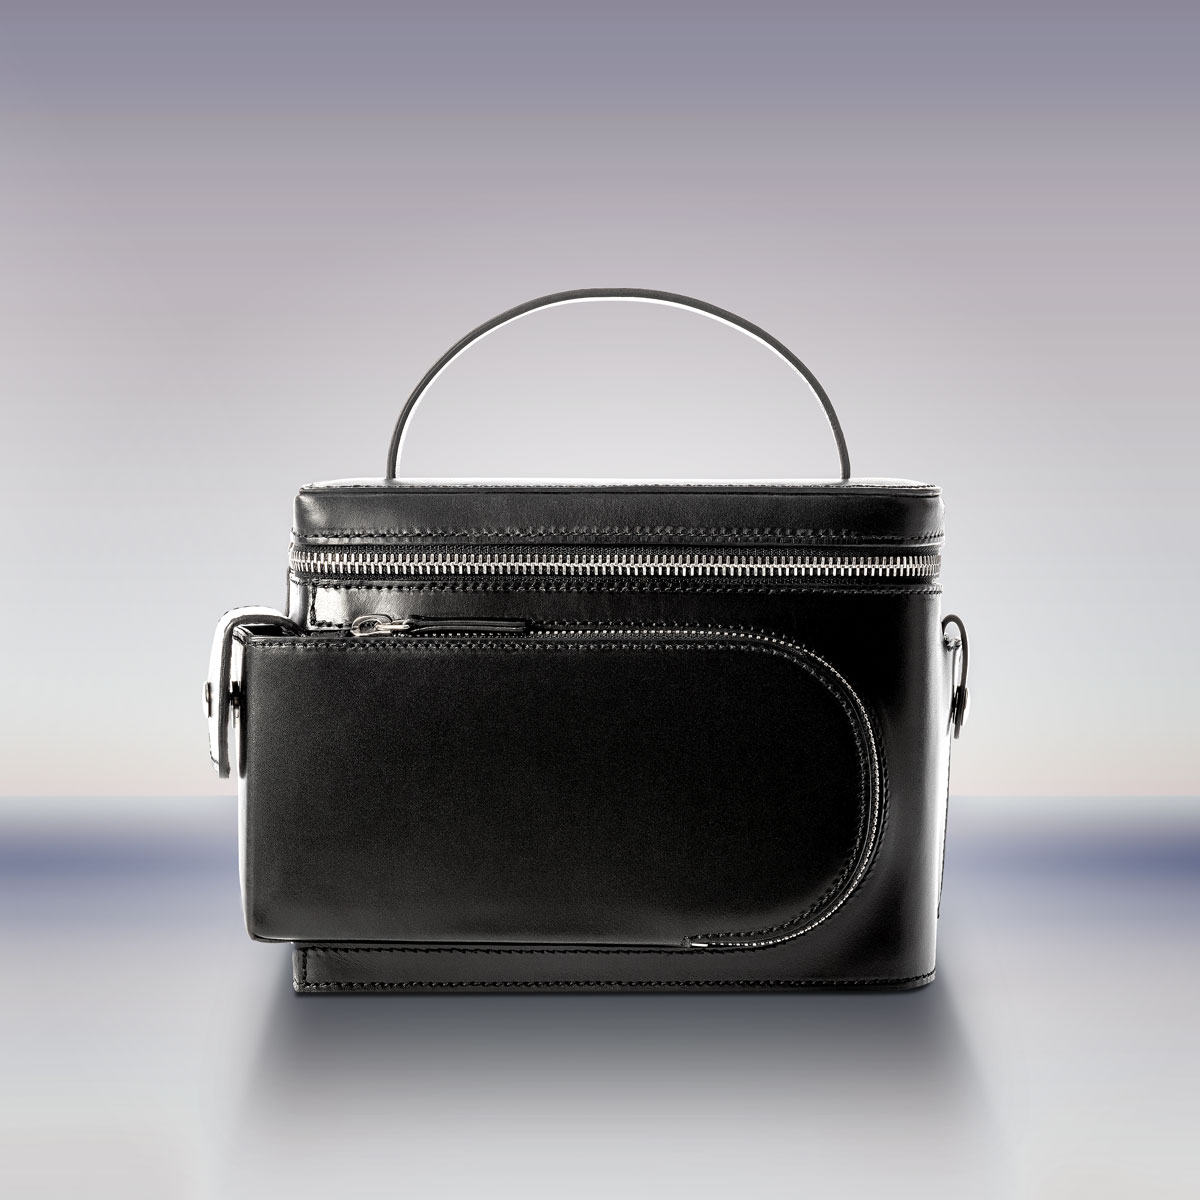 Merryl Tielman, Esther bag: a compact bag, to be to worn over the shoulder or crossbody, or carried by hand for a vanity style look. Made in Italy, vegetable tanned cow leather, colour black.